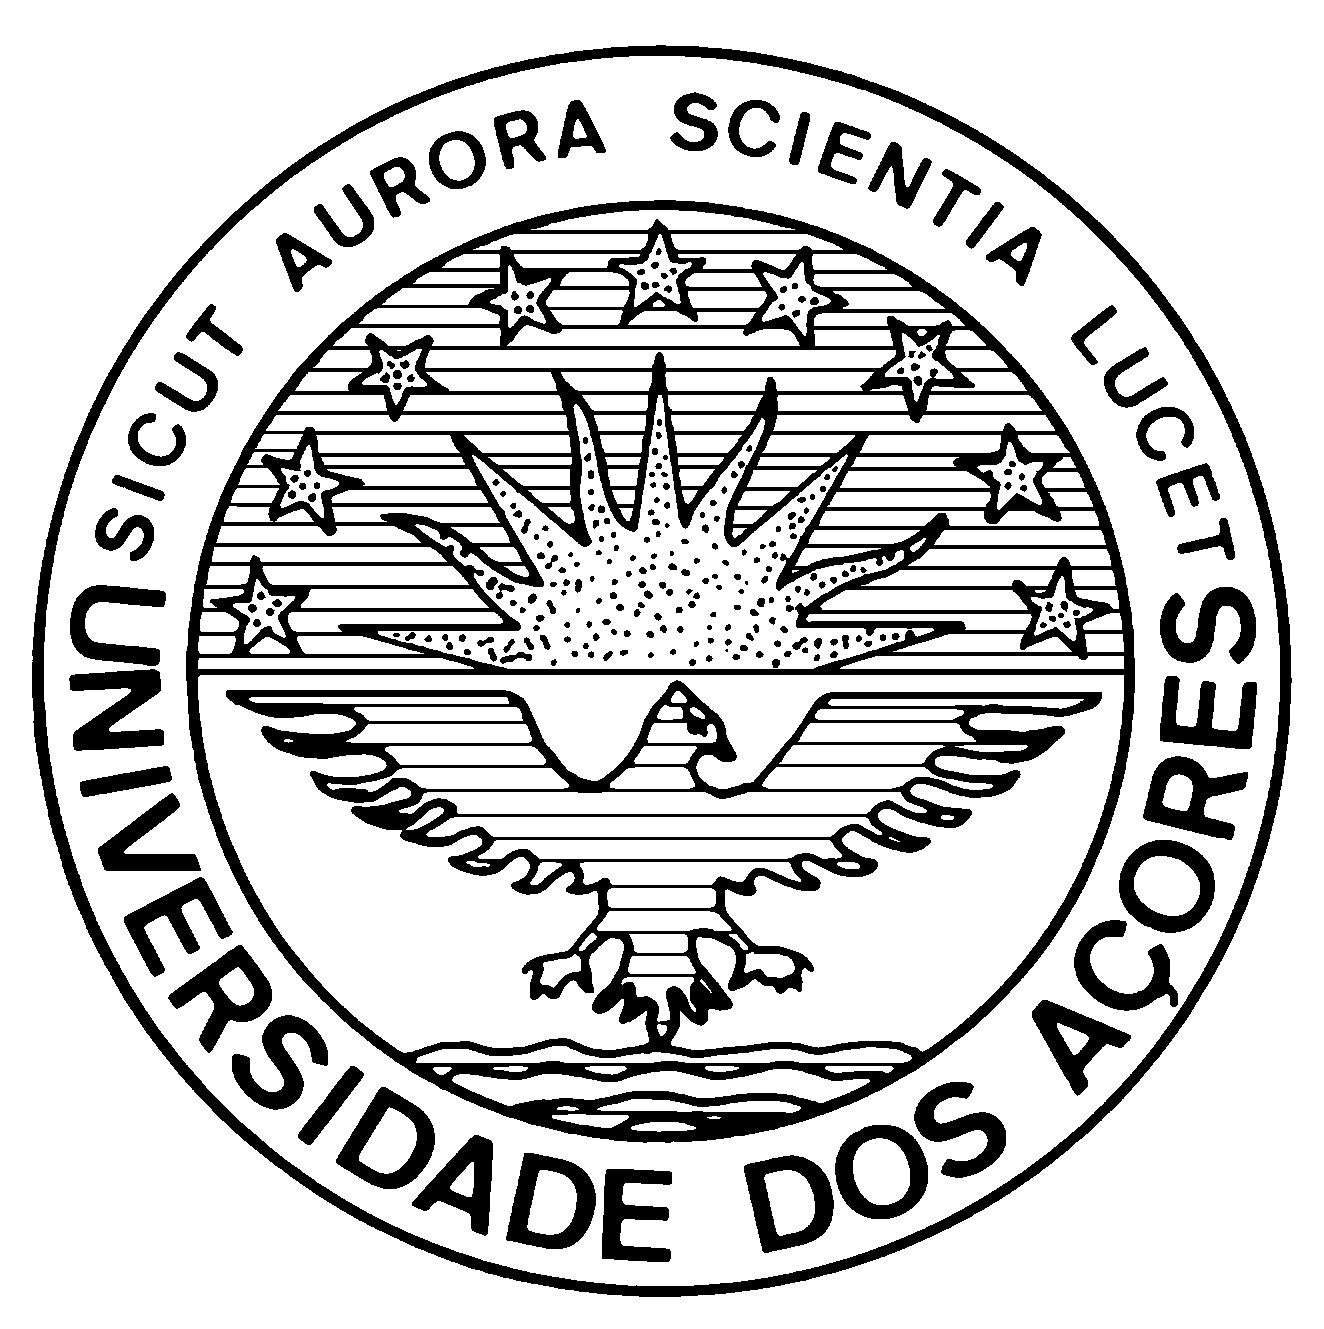 Azores Logo - University of the Azores Logo | Deep Carbon Observatory